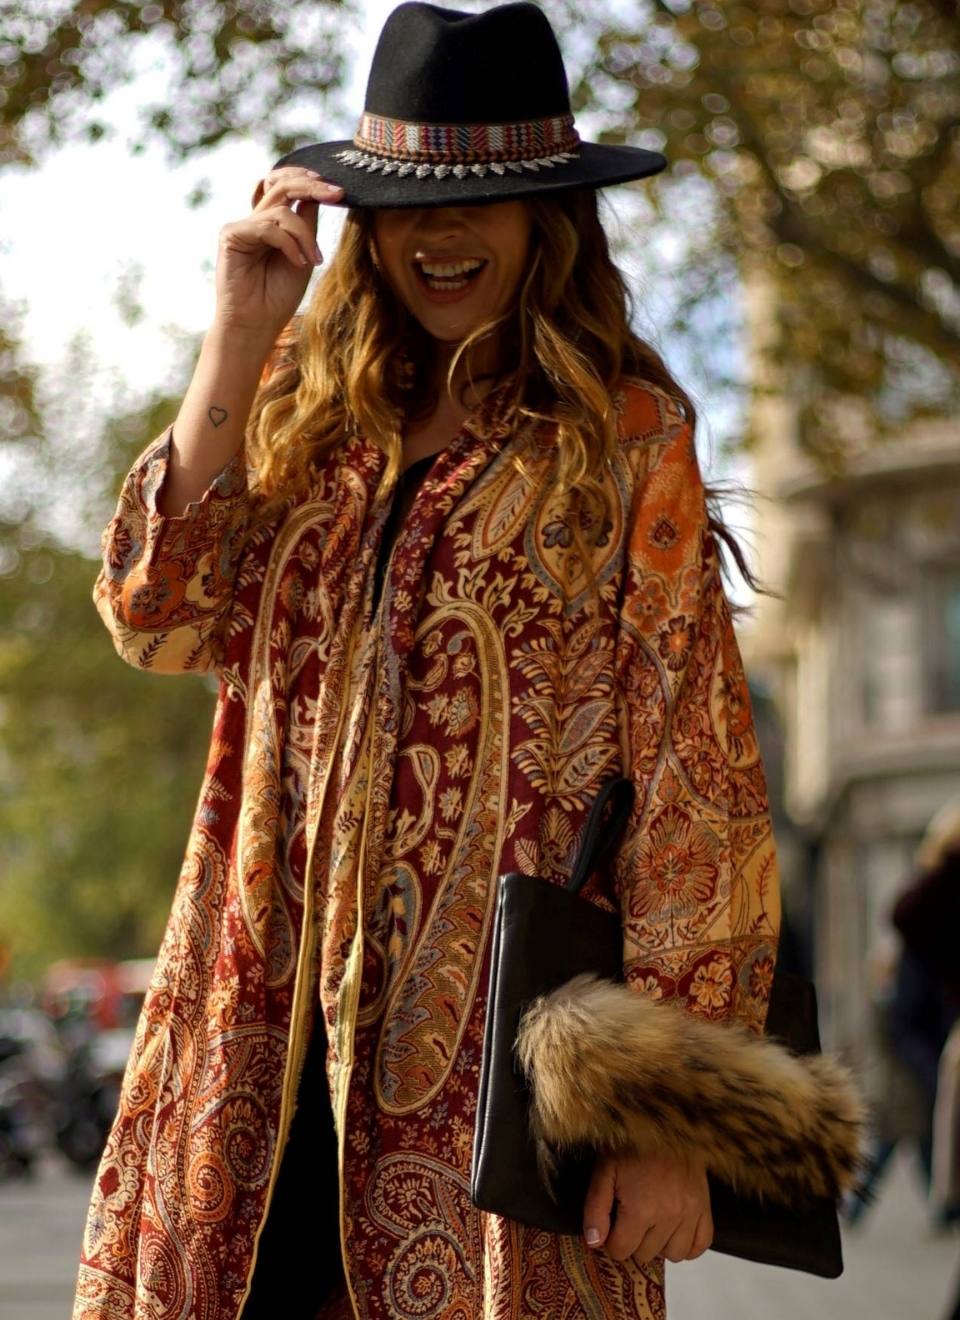 Boho Street Style, the bohemian style commands the street – JuanjoGallery